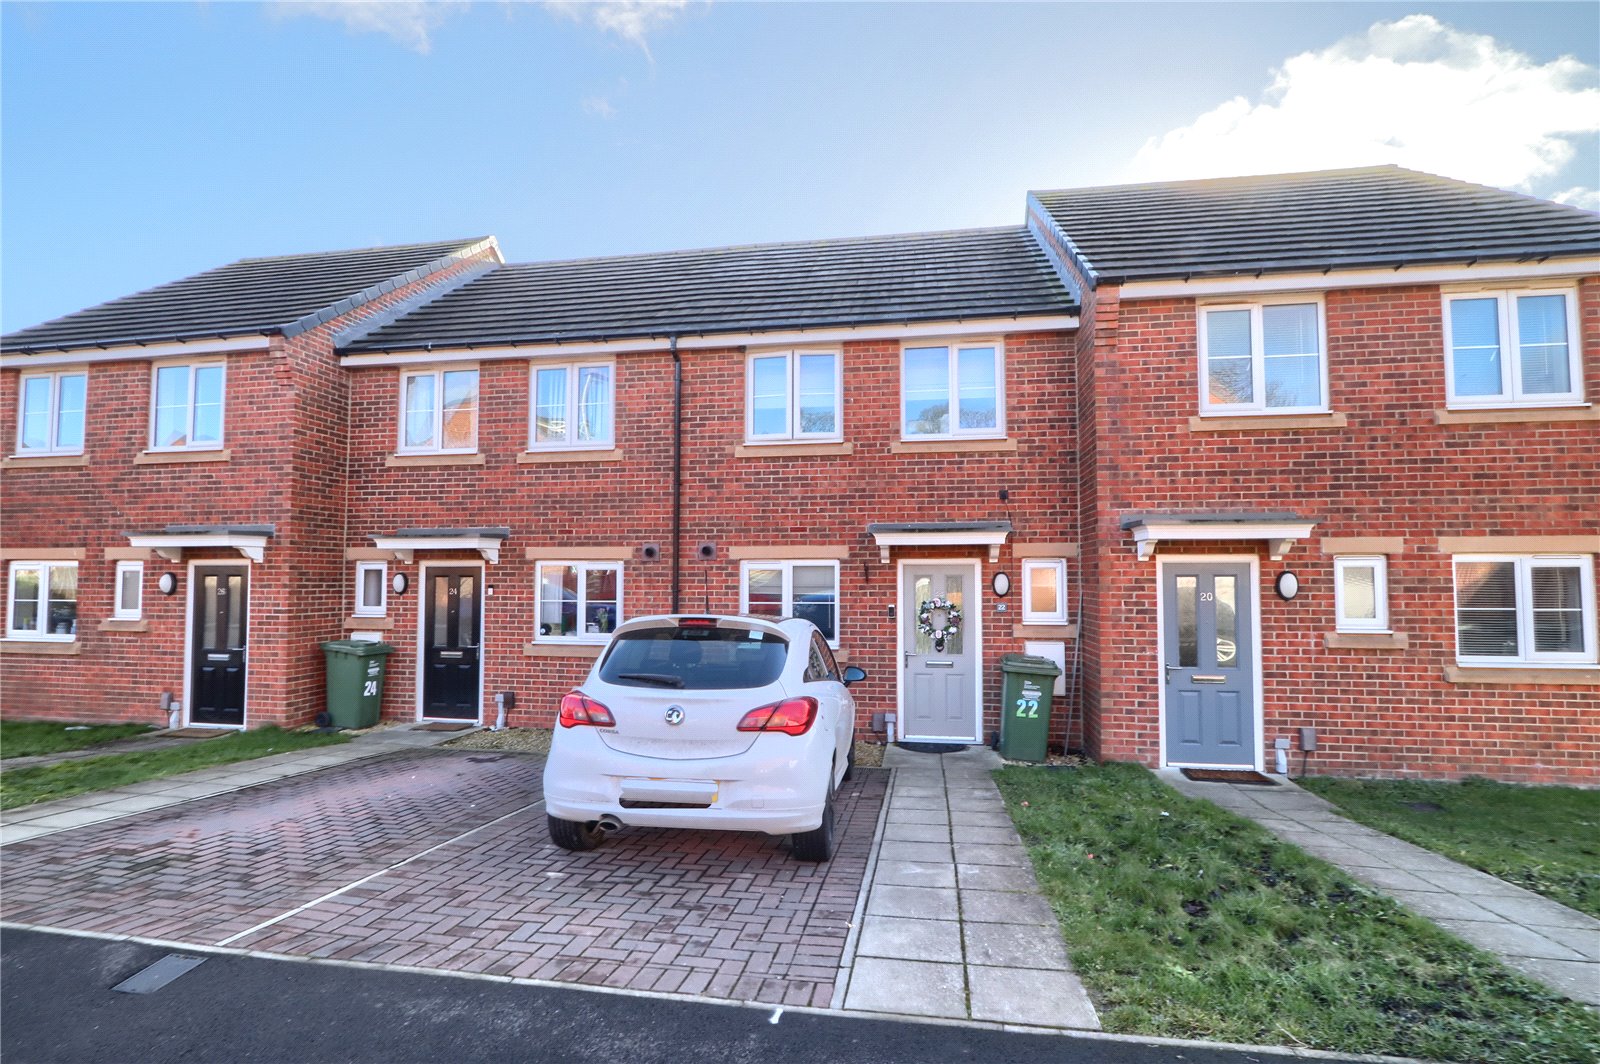 2 bed house for sale in Kingfisher Avenue, Norton 1